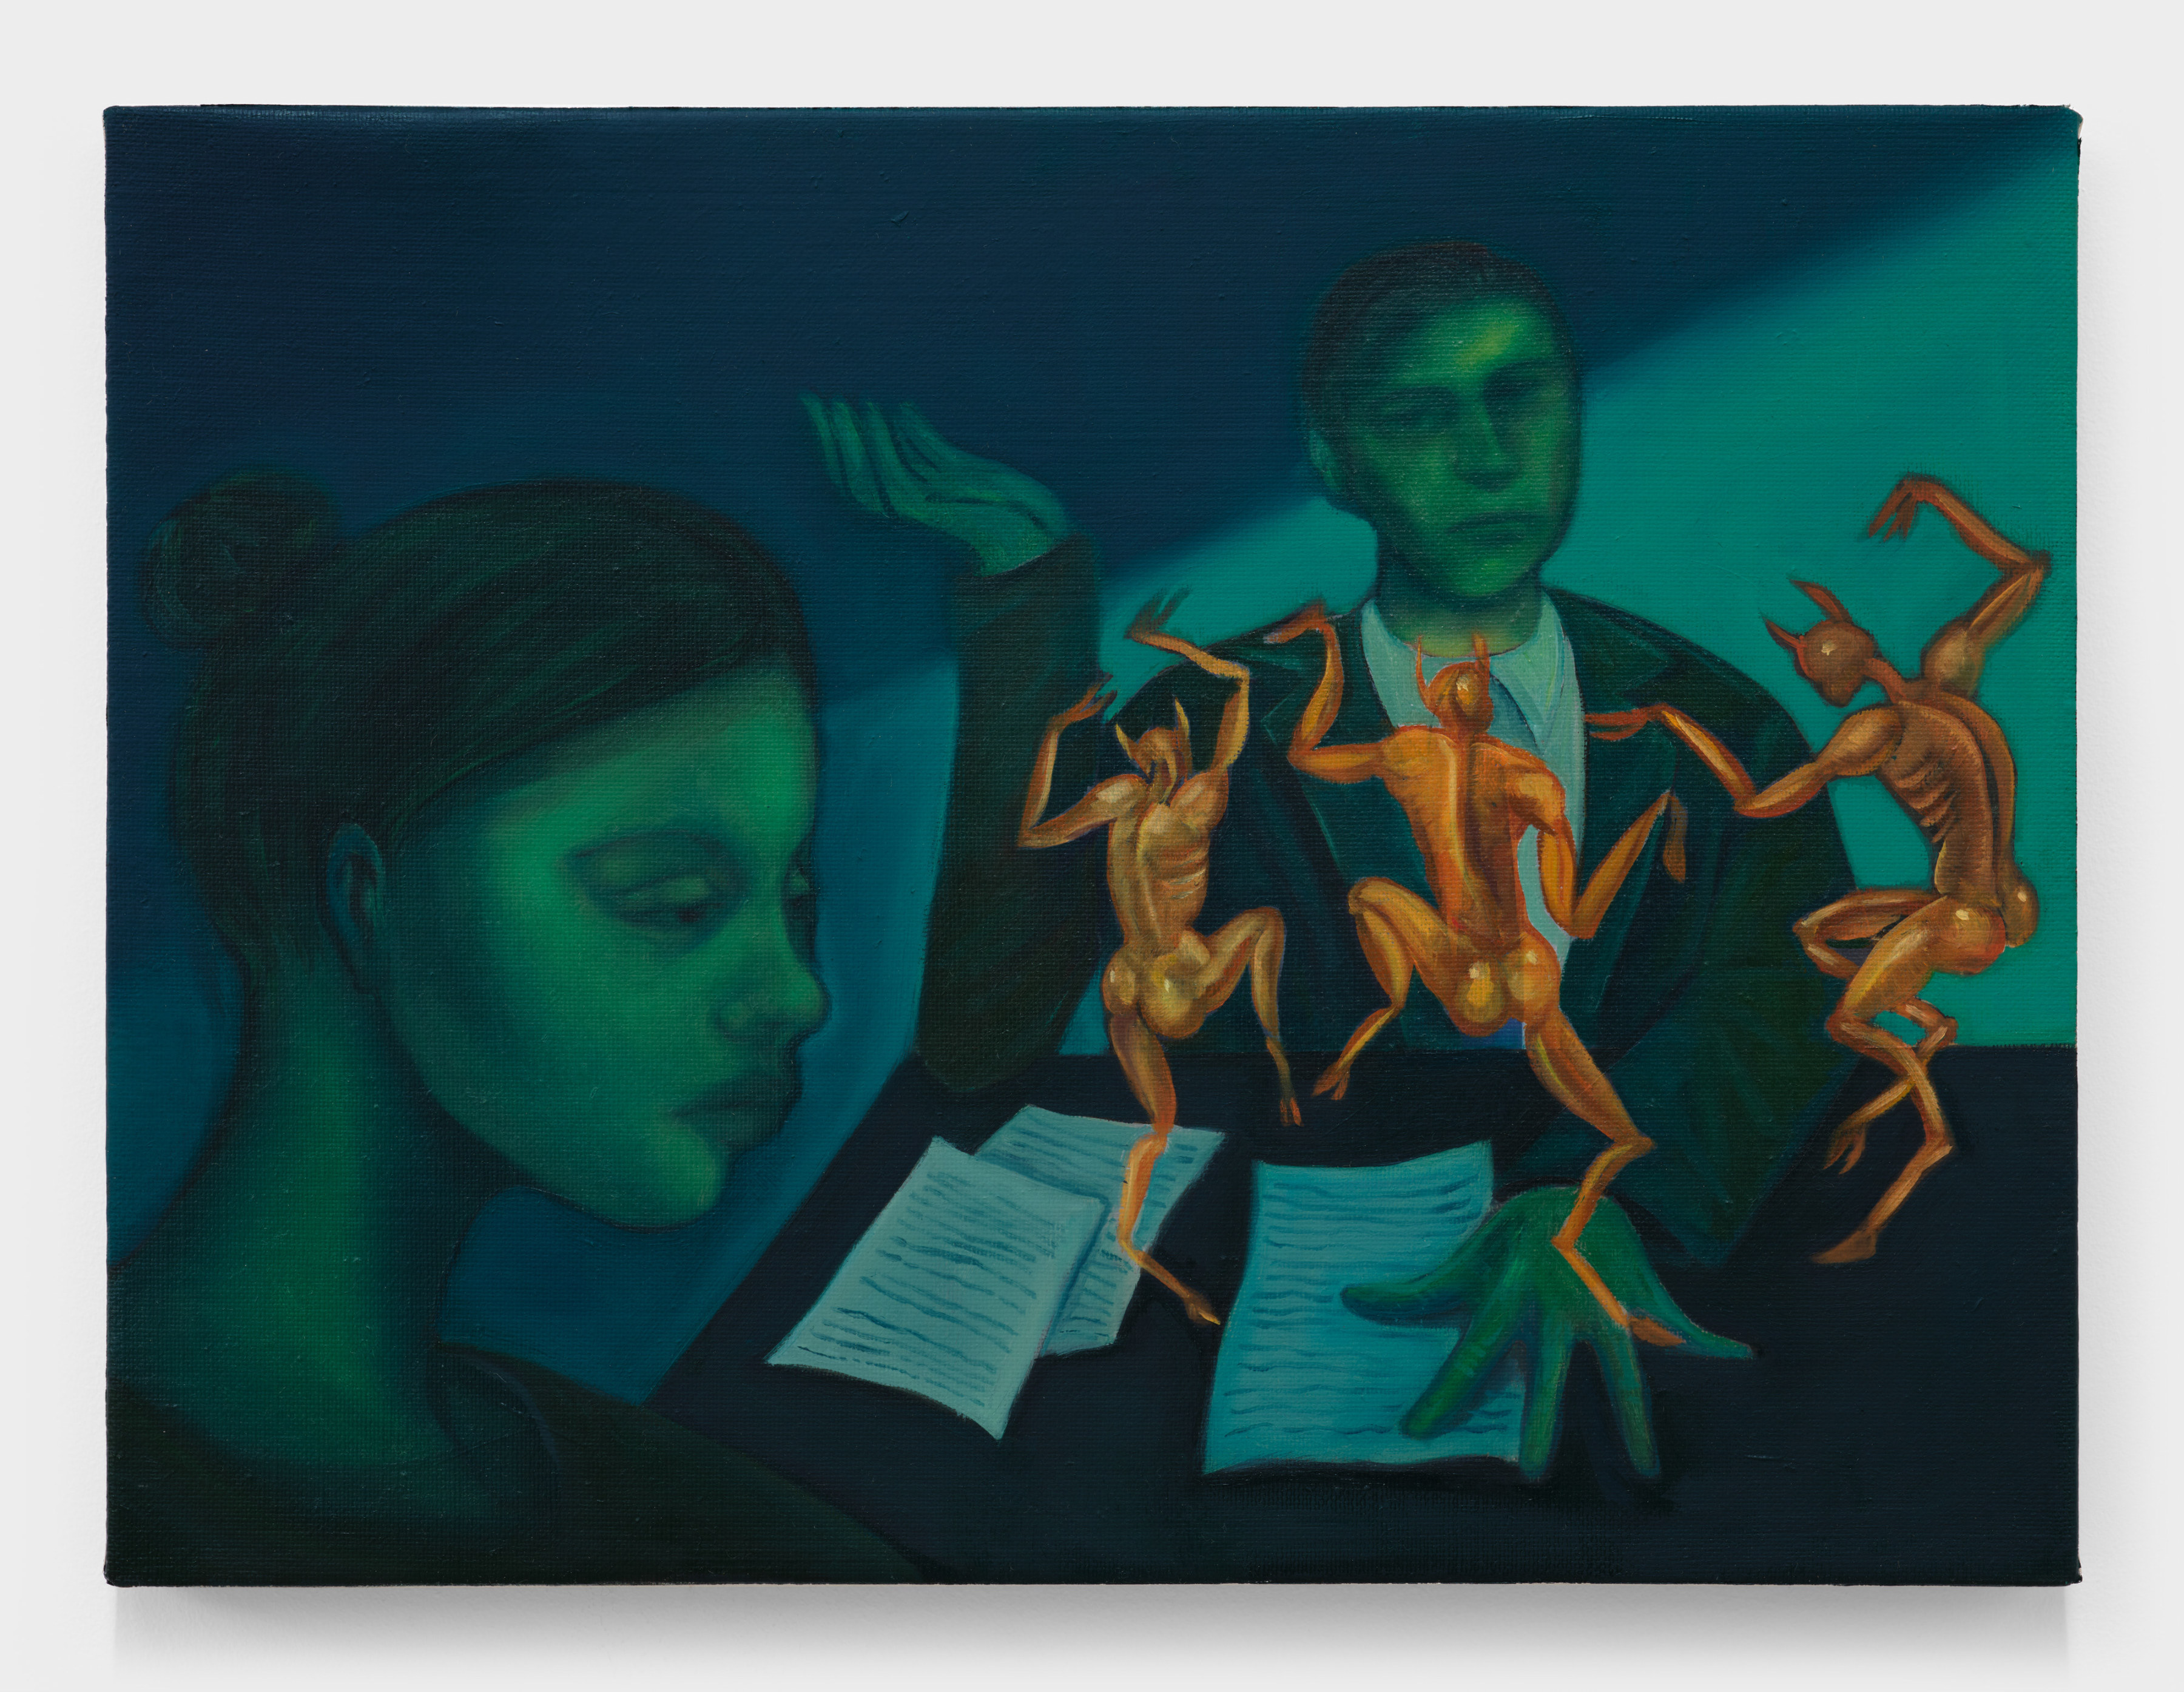 Bambou Gili's artwork "We Tried the Legal Route". Two people sit at a desk basked in green light with documents while three golden devils dance above. 12 x 16 in (30.5 x 40.6 cm), oil on linen, 2022